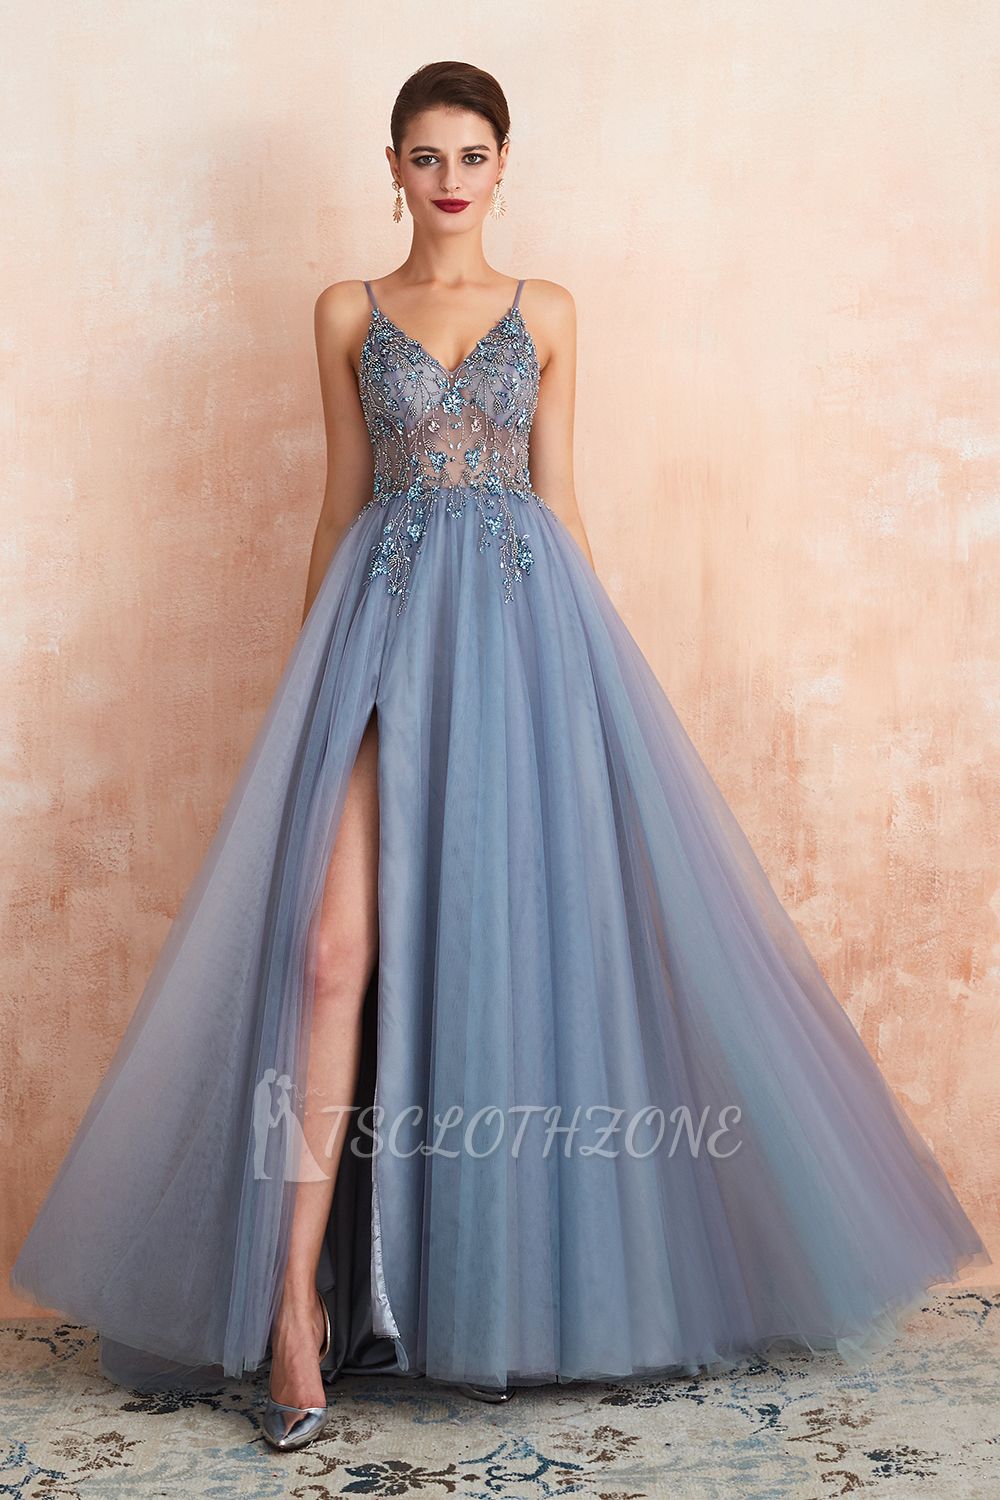 Charlotte | New Arrival Dusty Blue, Pink Spaghetti Strap Prom Dress with  Sexy High Split, Evening Gowns Online | tsclothzone